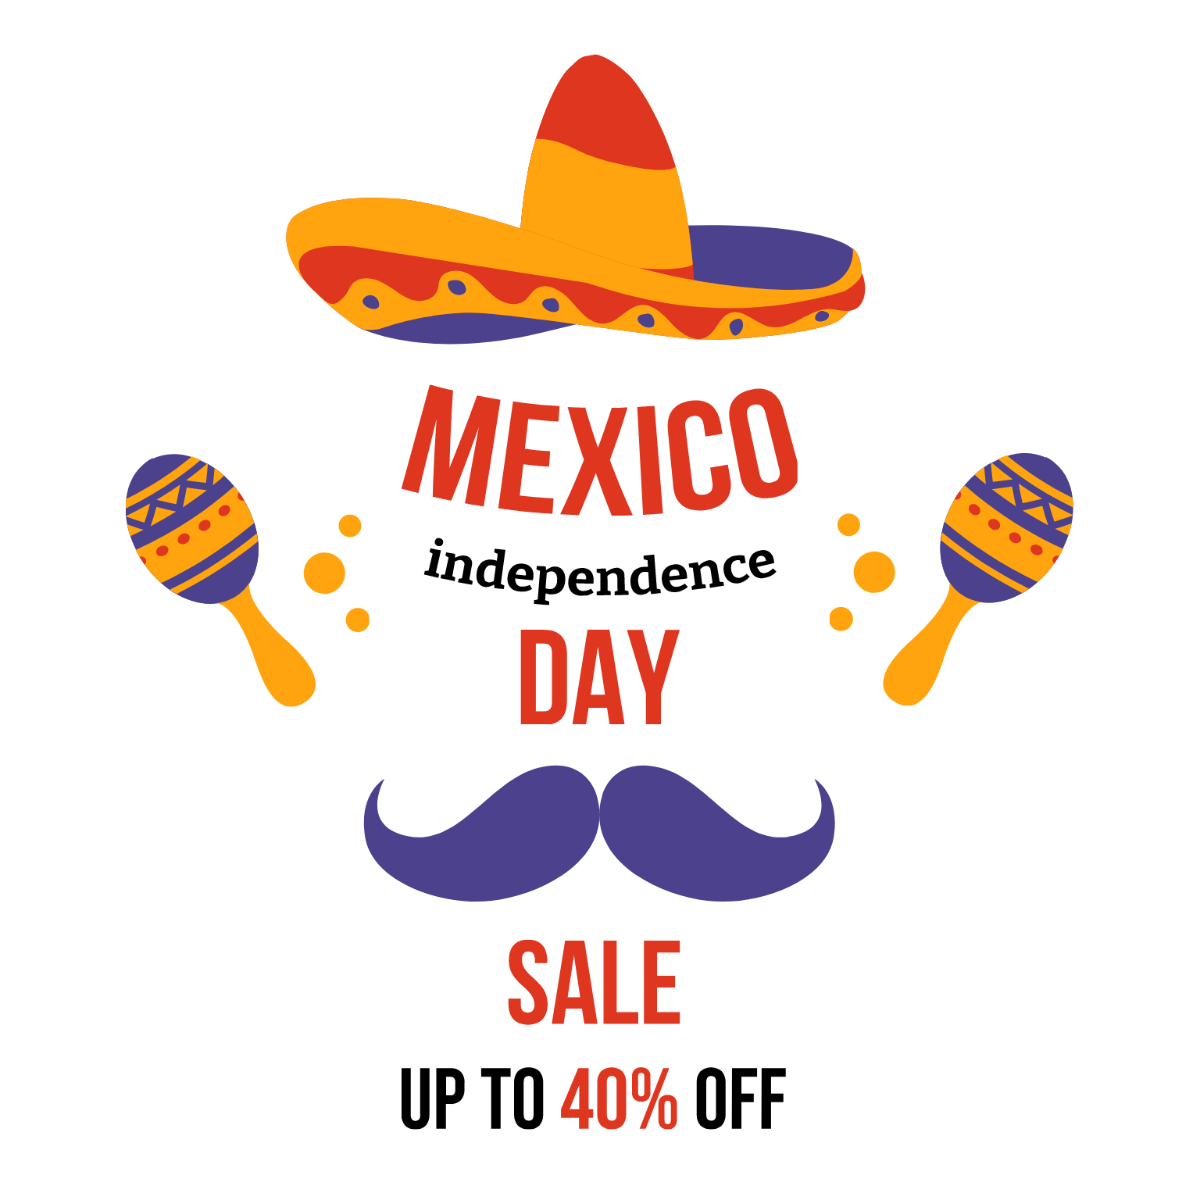 Mexican Independence Day Sale Illustration Template